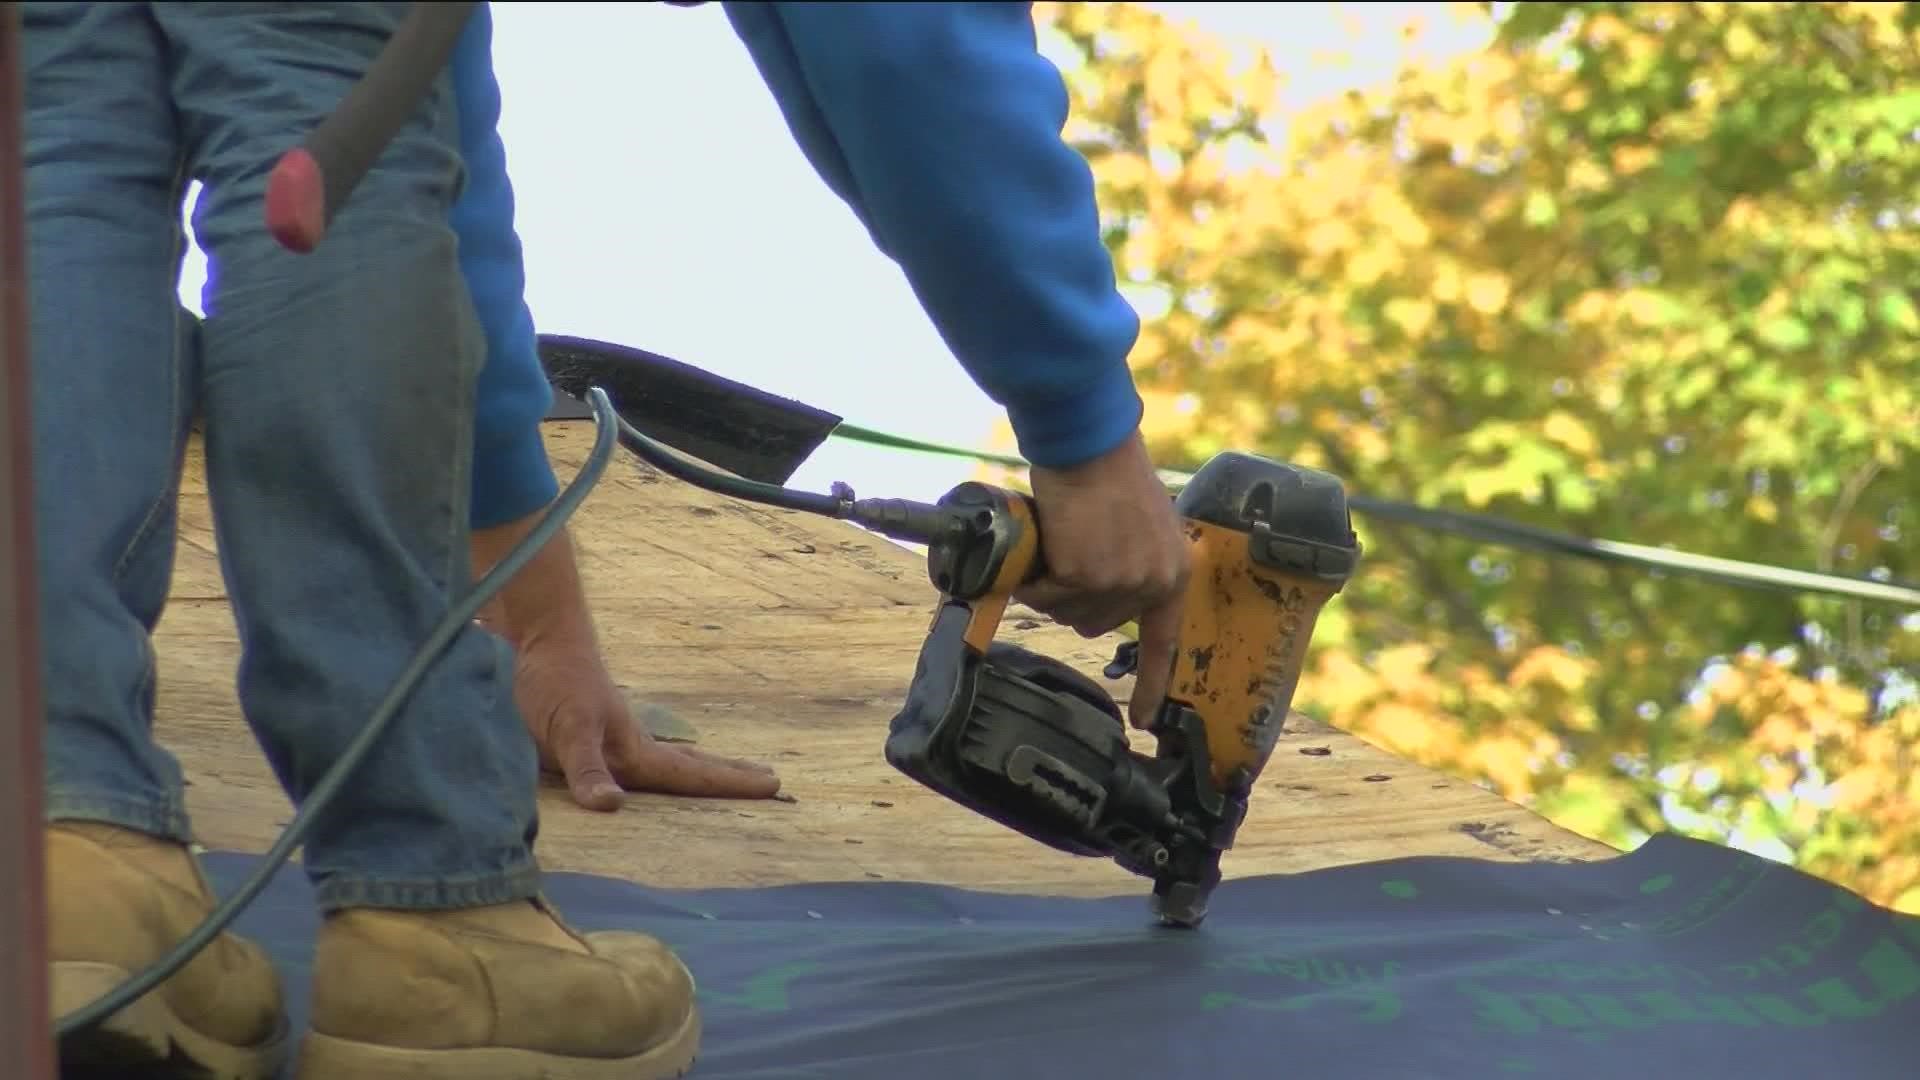 Hiring contractors and outside help to repair your home can sometimes be pricey.